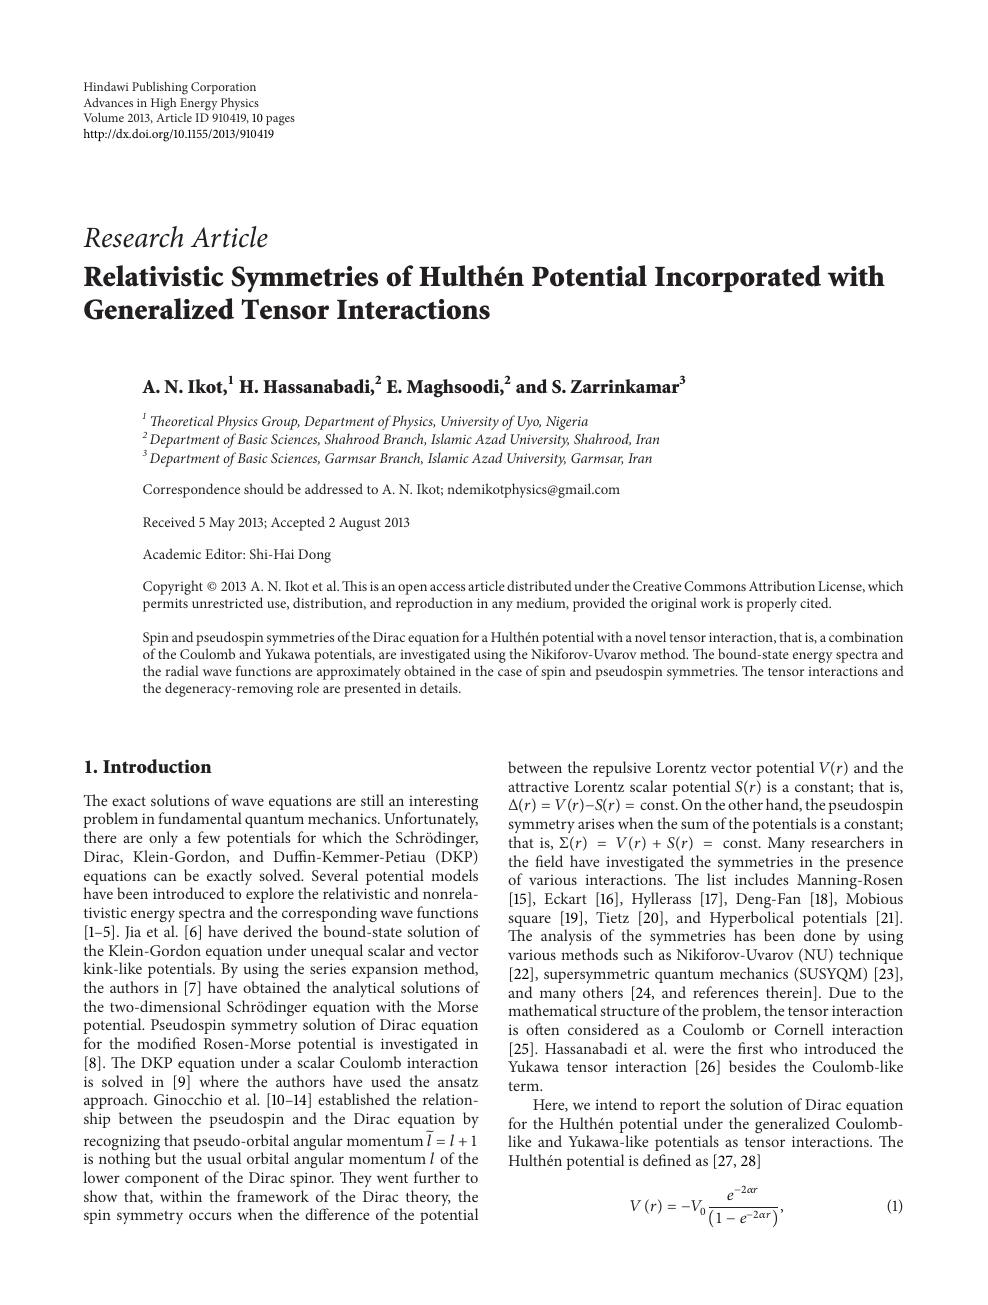 Relativistic Symmetries Of Hulthen Potential Incorporated With Generalized Tensor Interactions Topic Of Research Paper In Physical Sciences Download Scholarly Article Pdf And Read For Free On Cyberleninka Open Science Hub